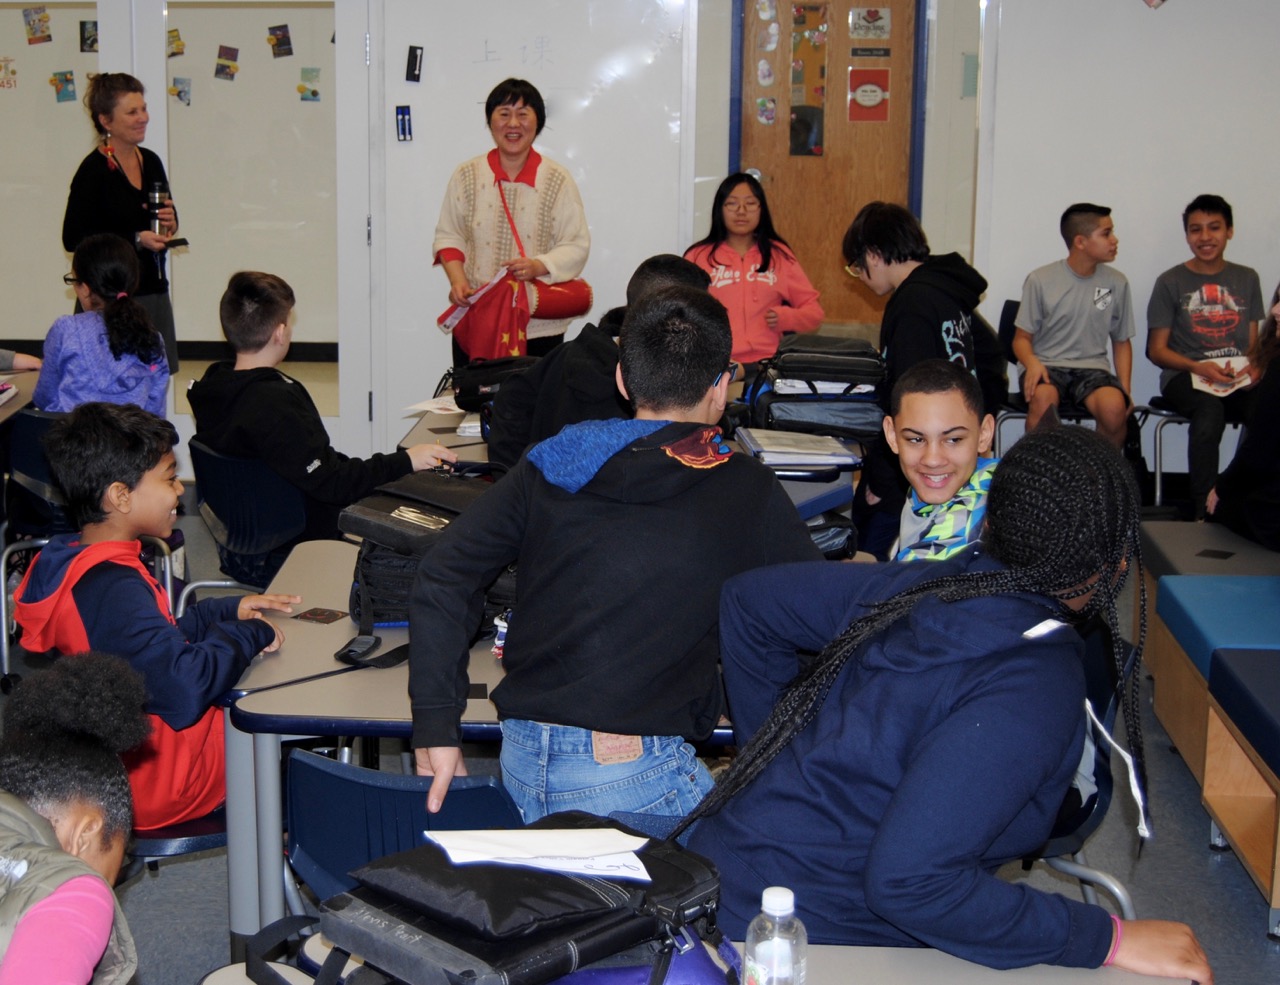 PVMS Mandarin Chinese Distance Learning teacher, Ping Moroney, makes a visit to PVMS to hold class in person and celebrate Chinese New Year. Click photo for more info